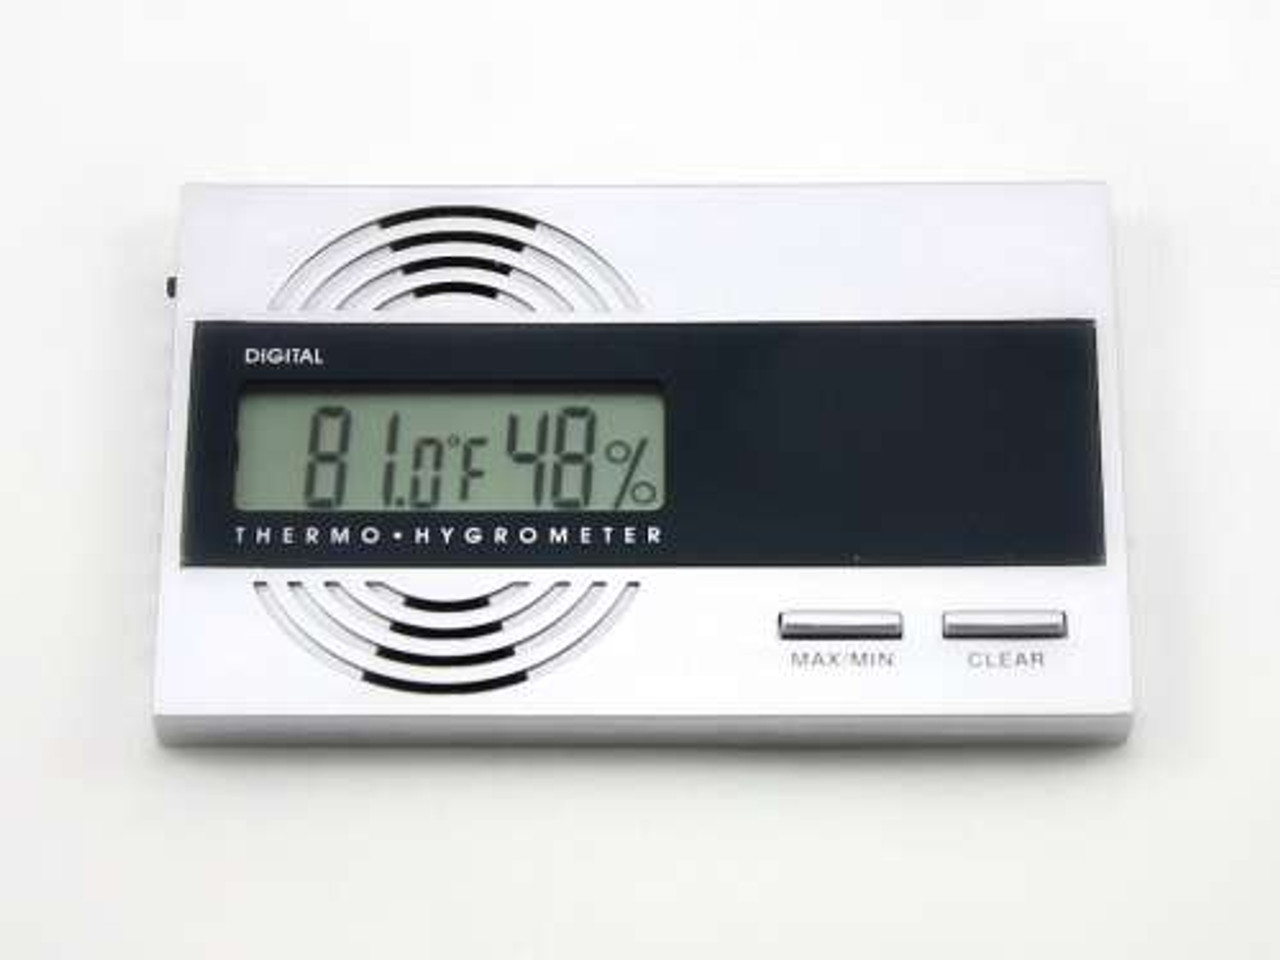 Pierre Digital Cigar Hygrometer with Thermometer